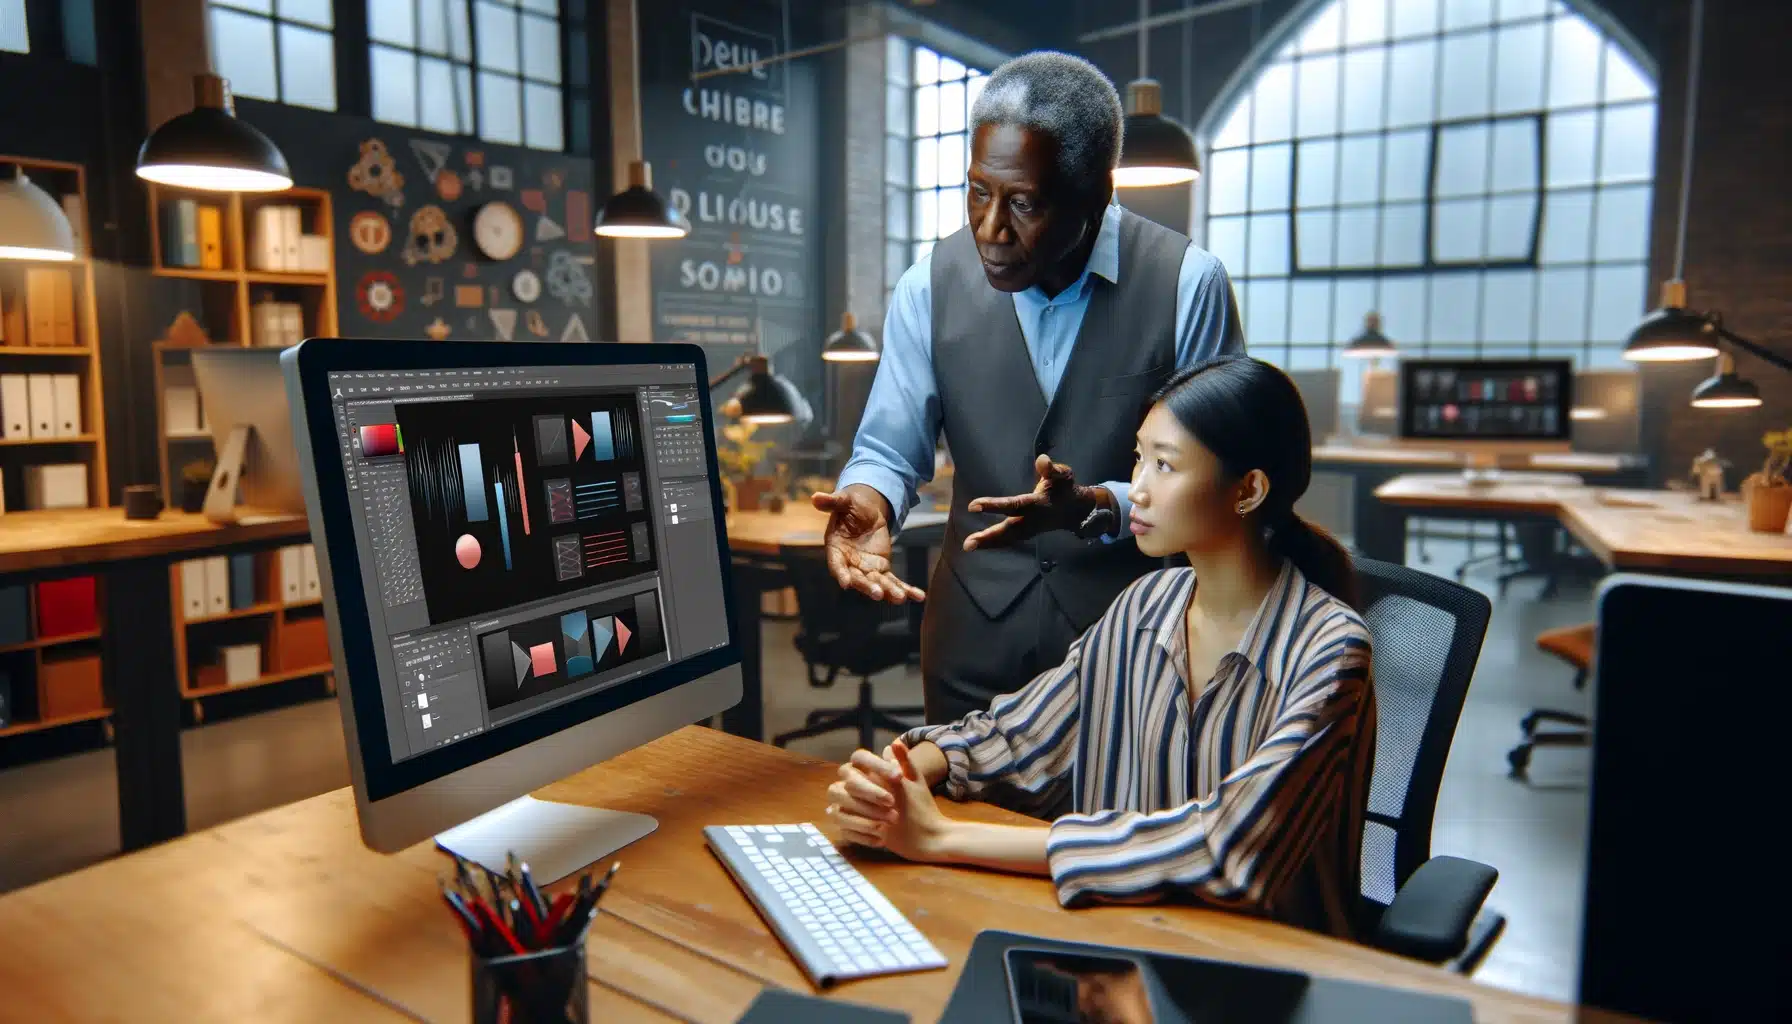 In a modern tech office, a young Asian female adjusts layering on a computer while discussing resizing techniques with a senior Black male colleague.